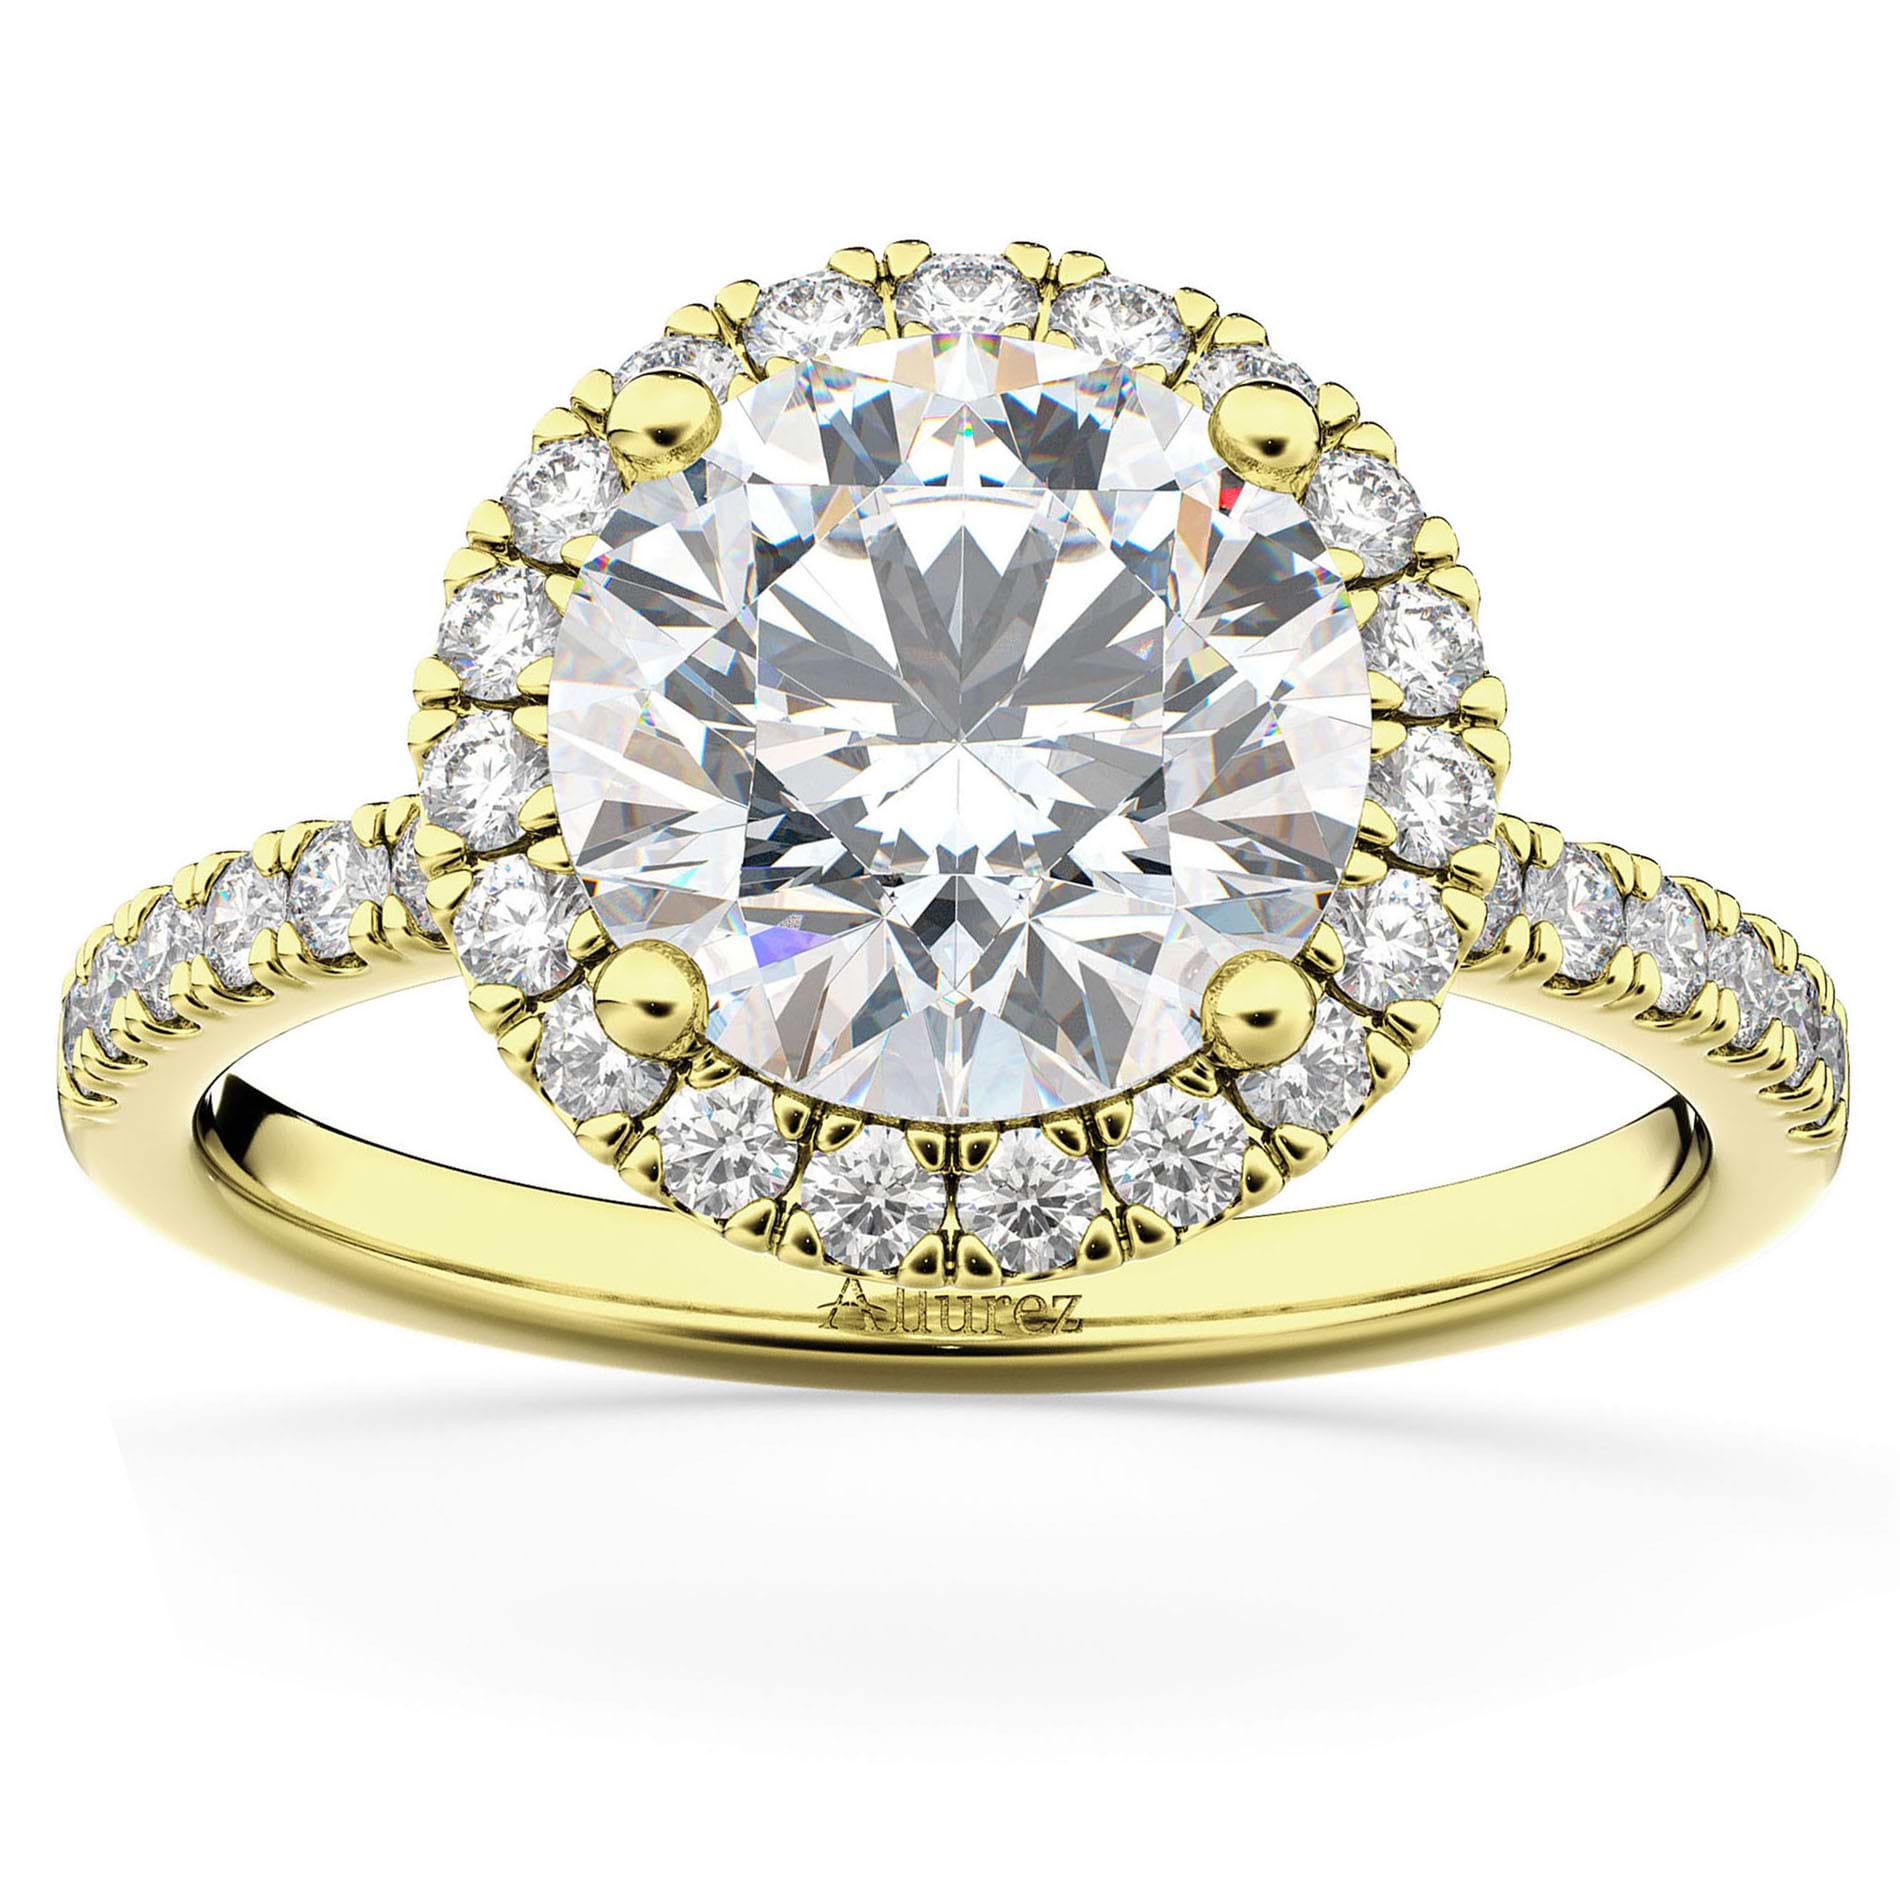 Lab Grown Diamond Accented Halo Engagement Ring Setting 14K Yellow Gold (0.50ct)